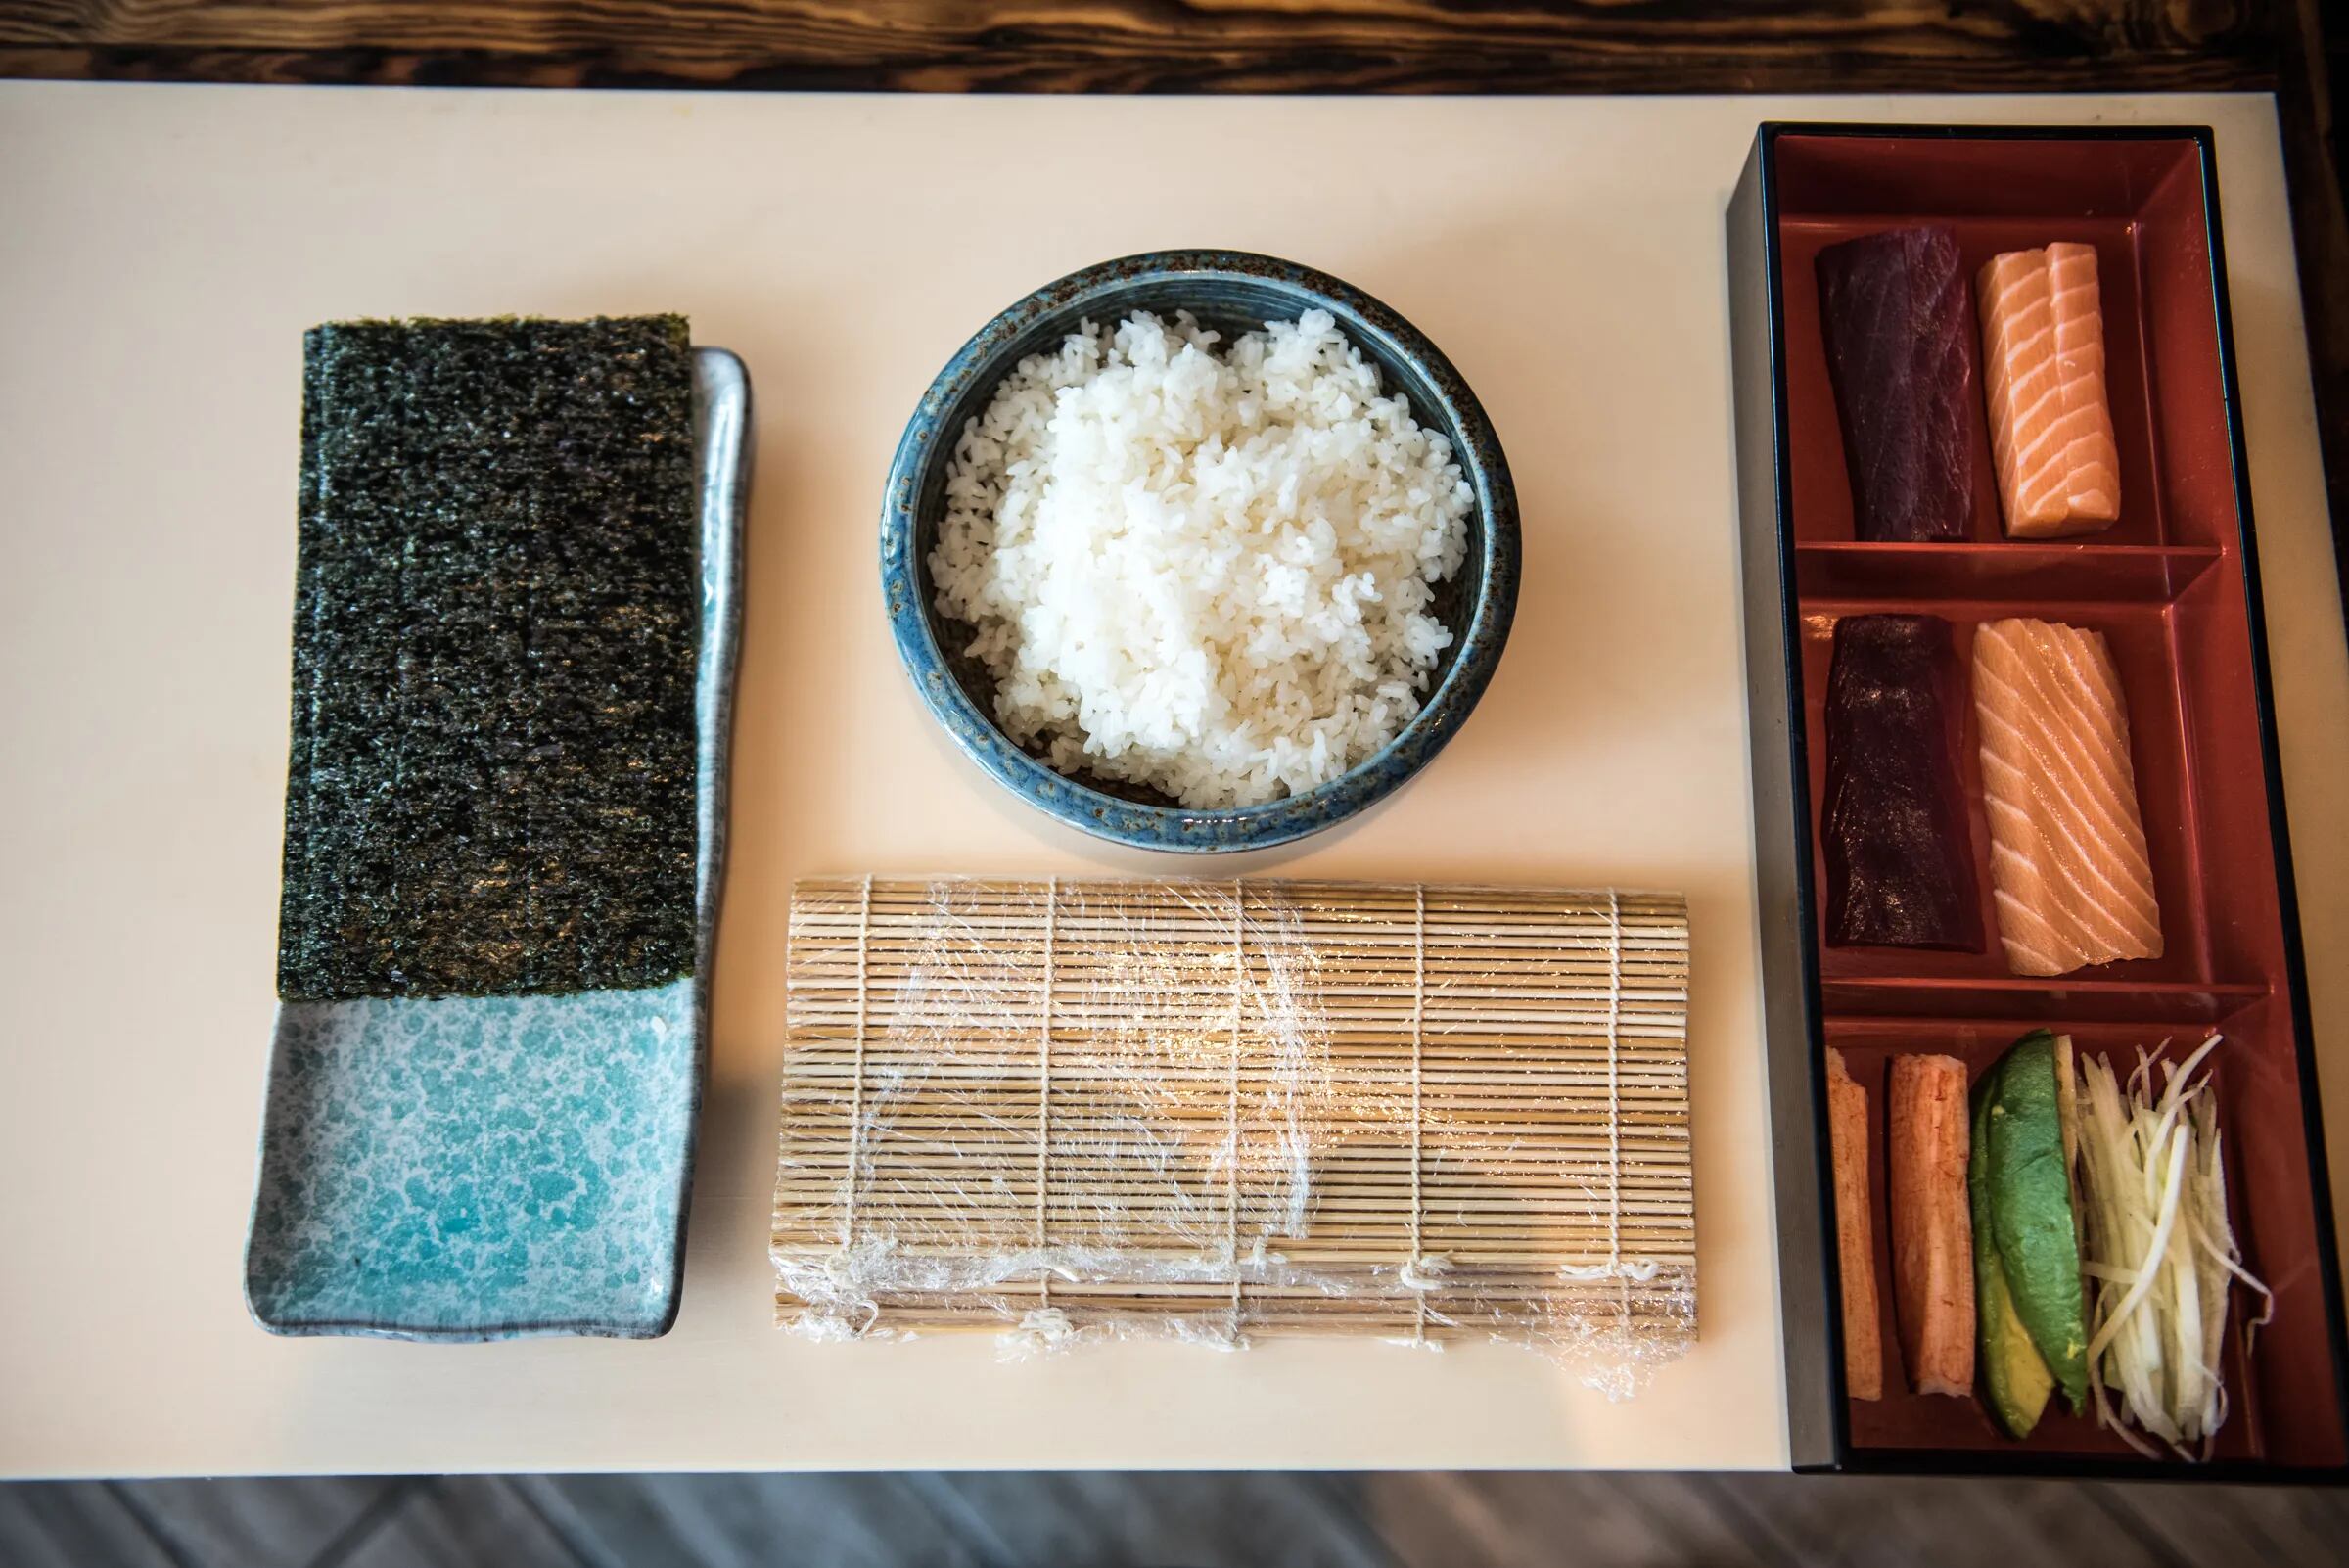 Just How Bad Is It to Eat Your Sushi with White Rice?